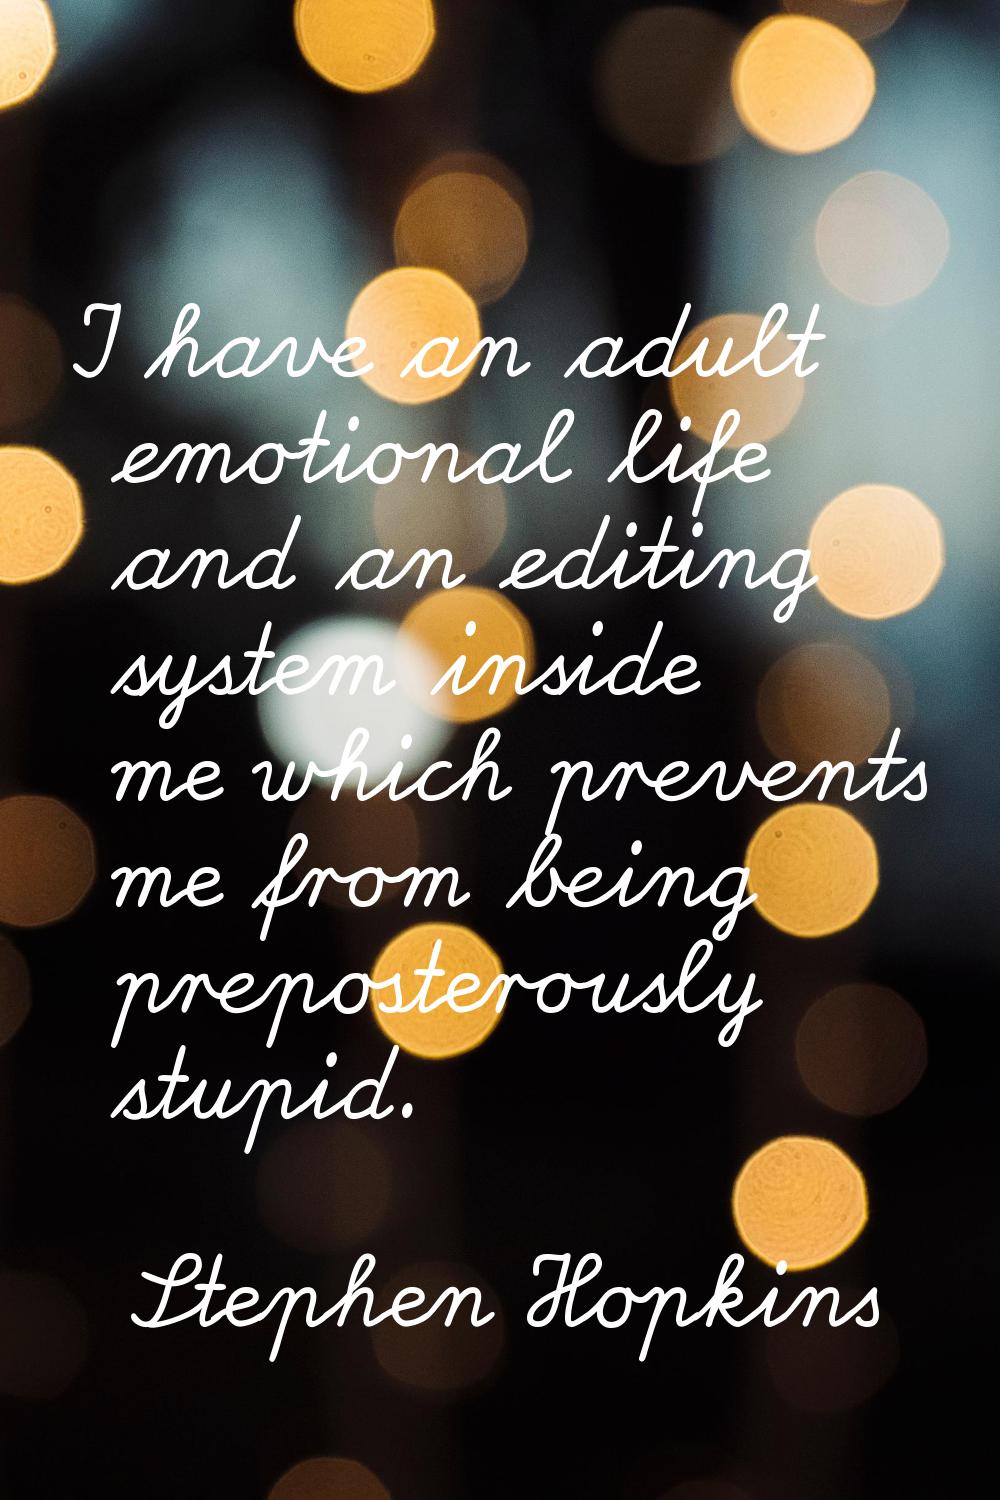 I have an adult emotional life and an editing system inside me which prevents me from being prepost